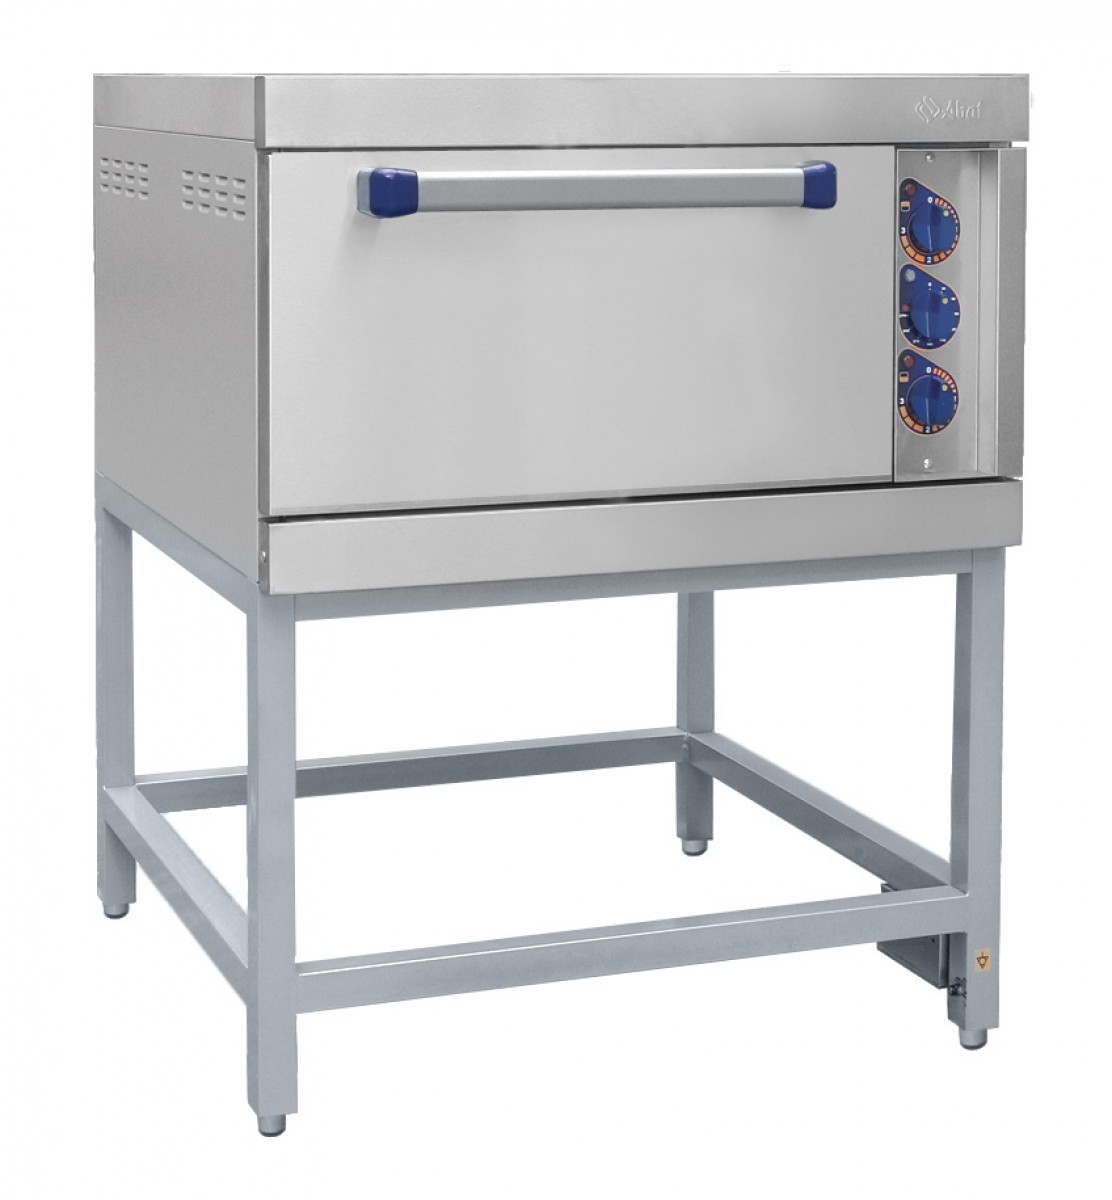 Cooking oven Abat ШЖЭ-1-К-2/1 (with convection)